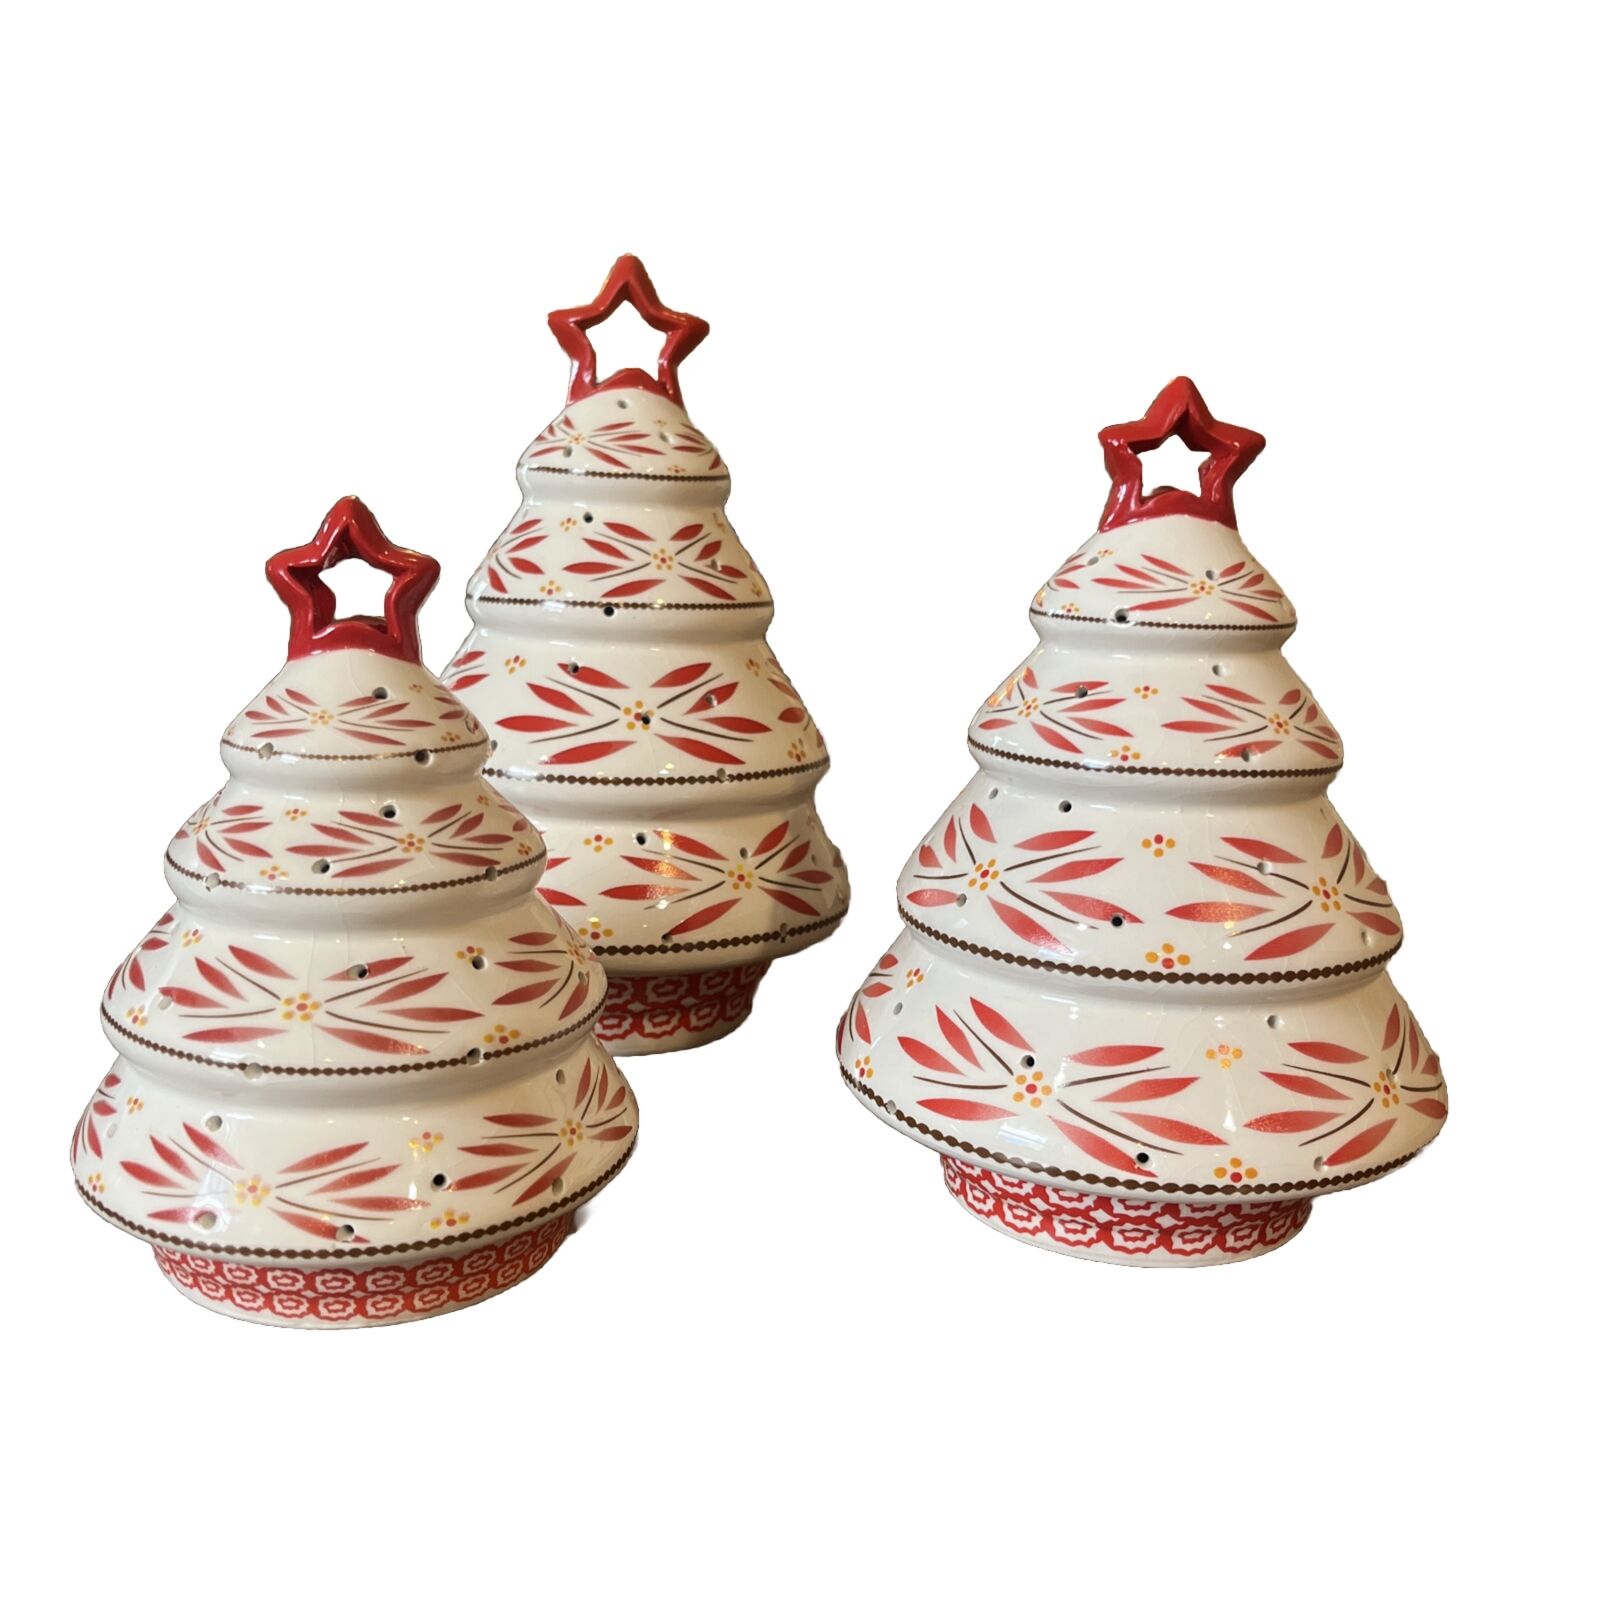 Temptations By Tara Light Up Christmas Trees Set Of 3 Old World Red Cranberry